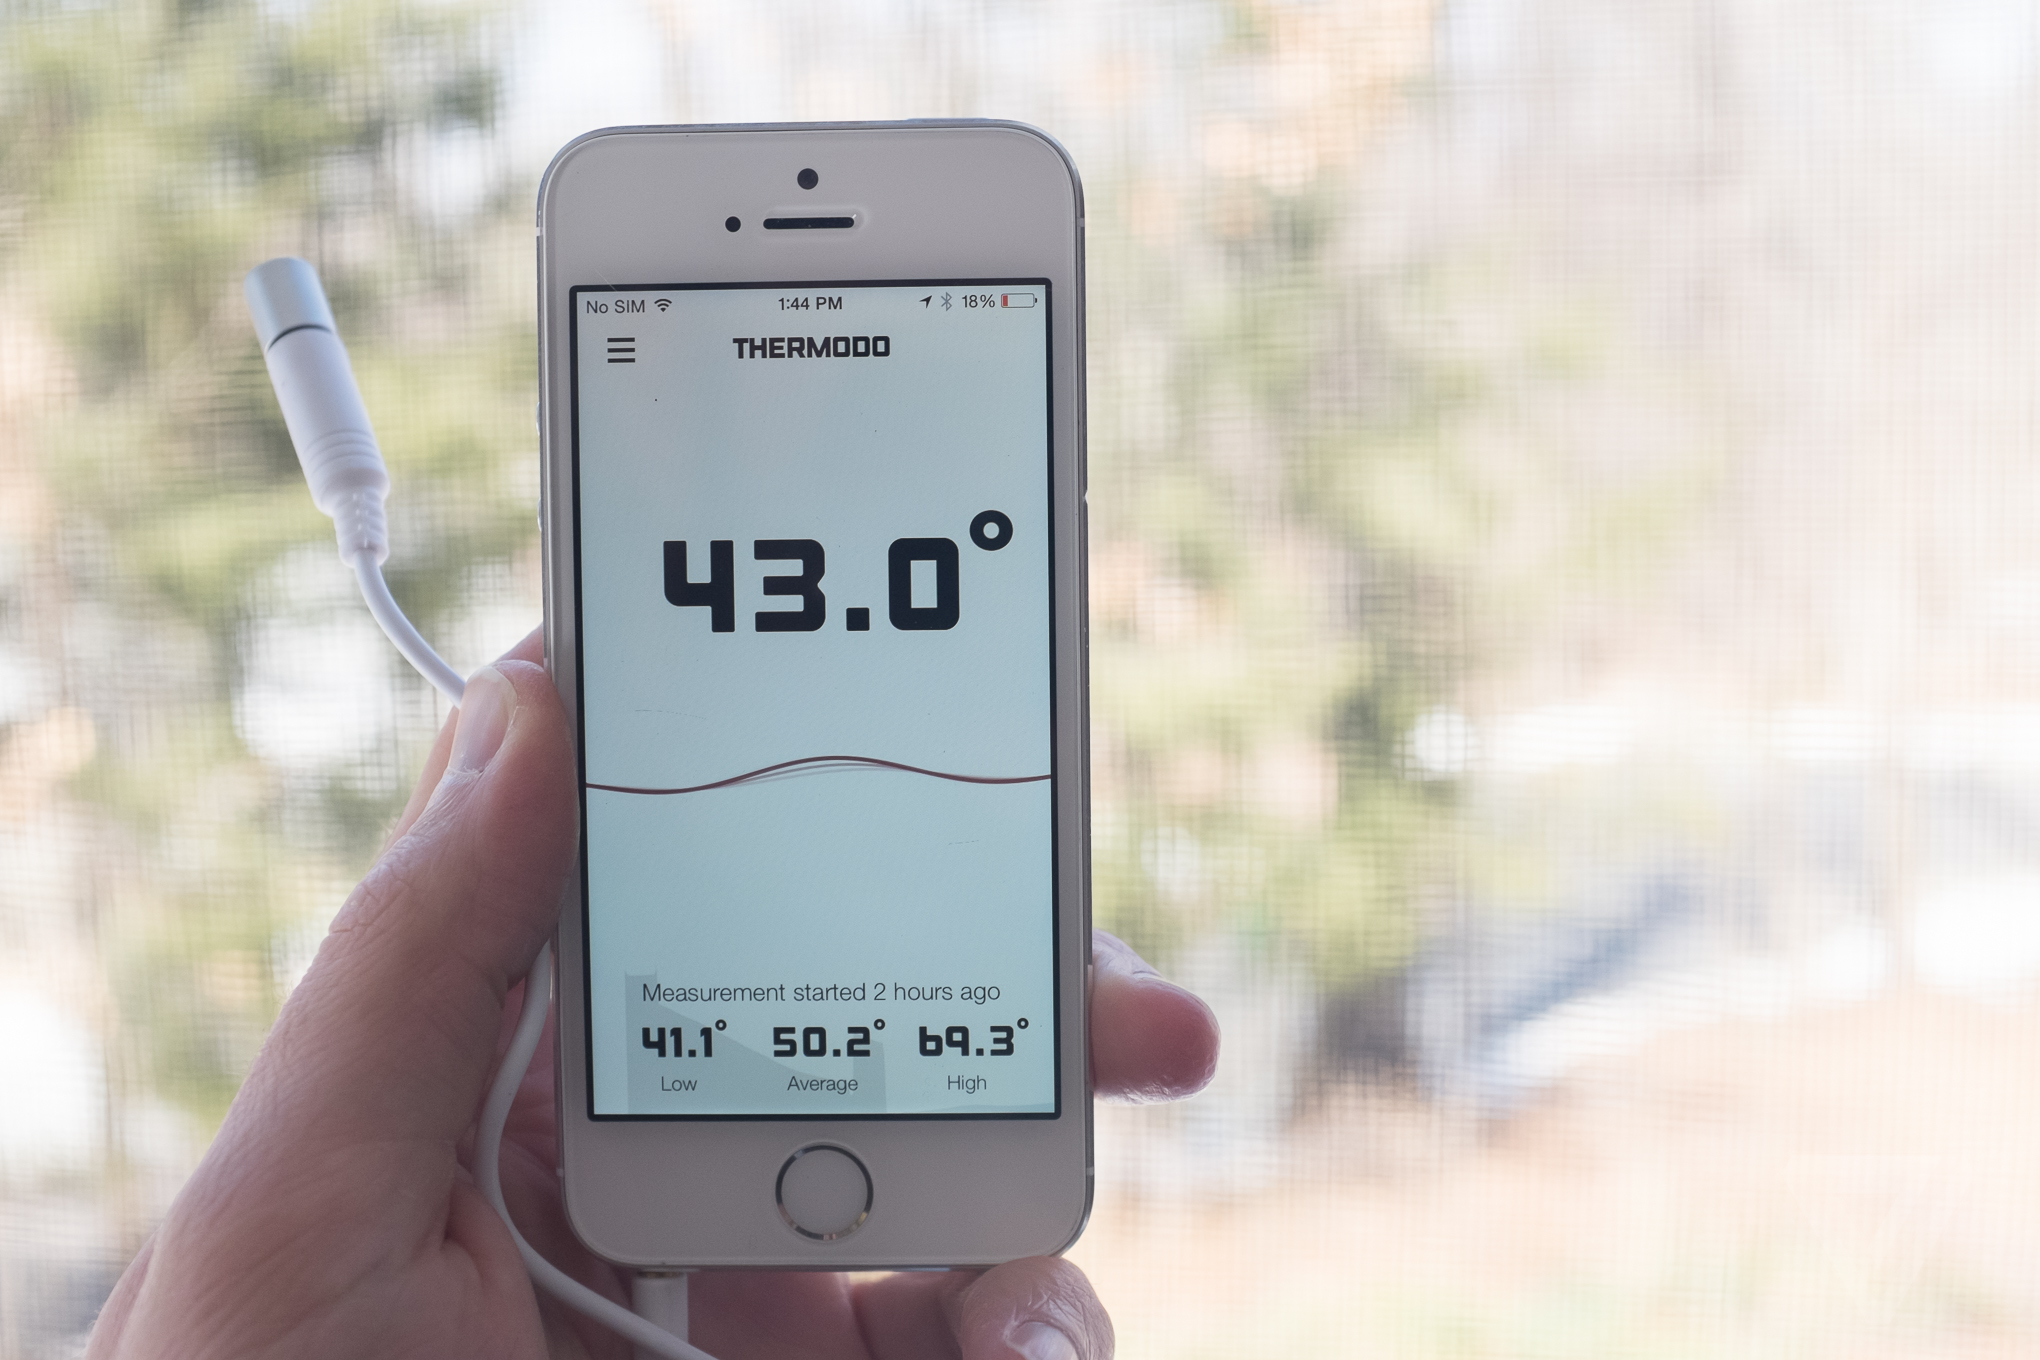 Thermodo turns your smartphone into an instant thermometer